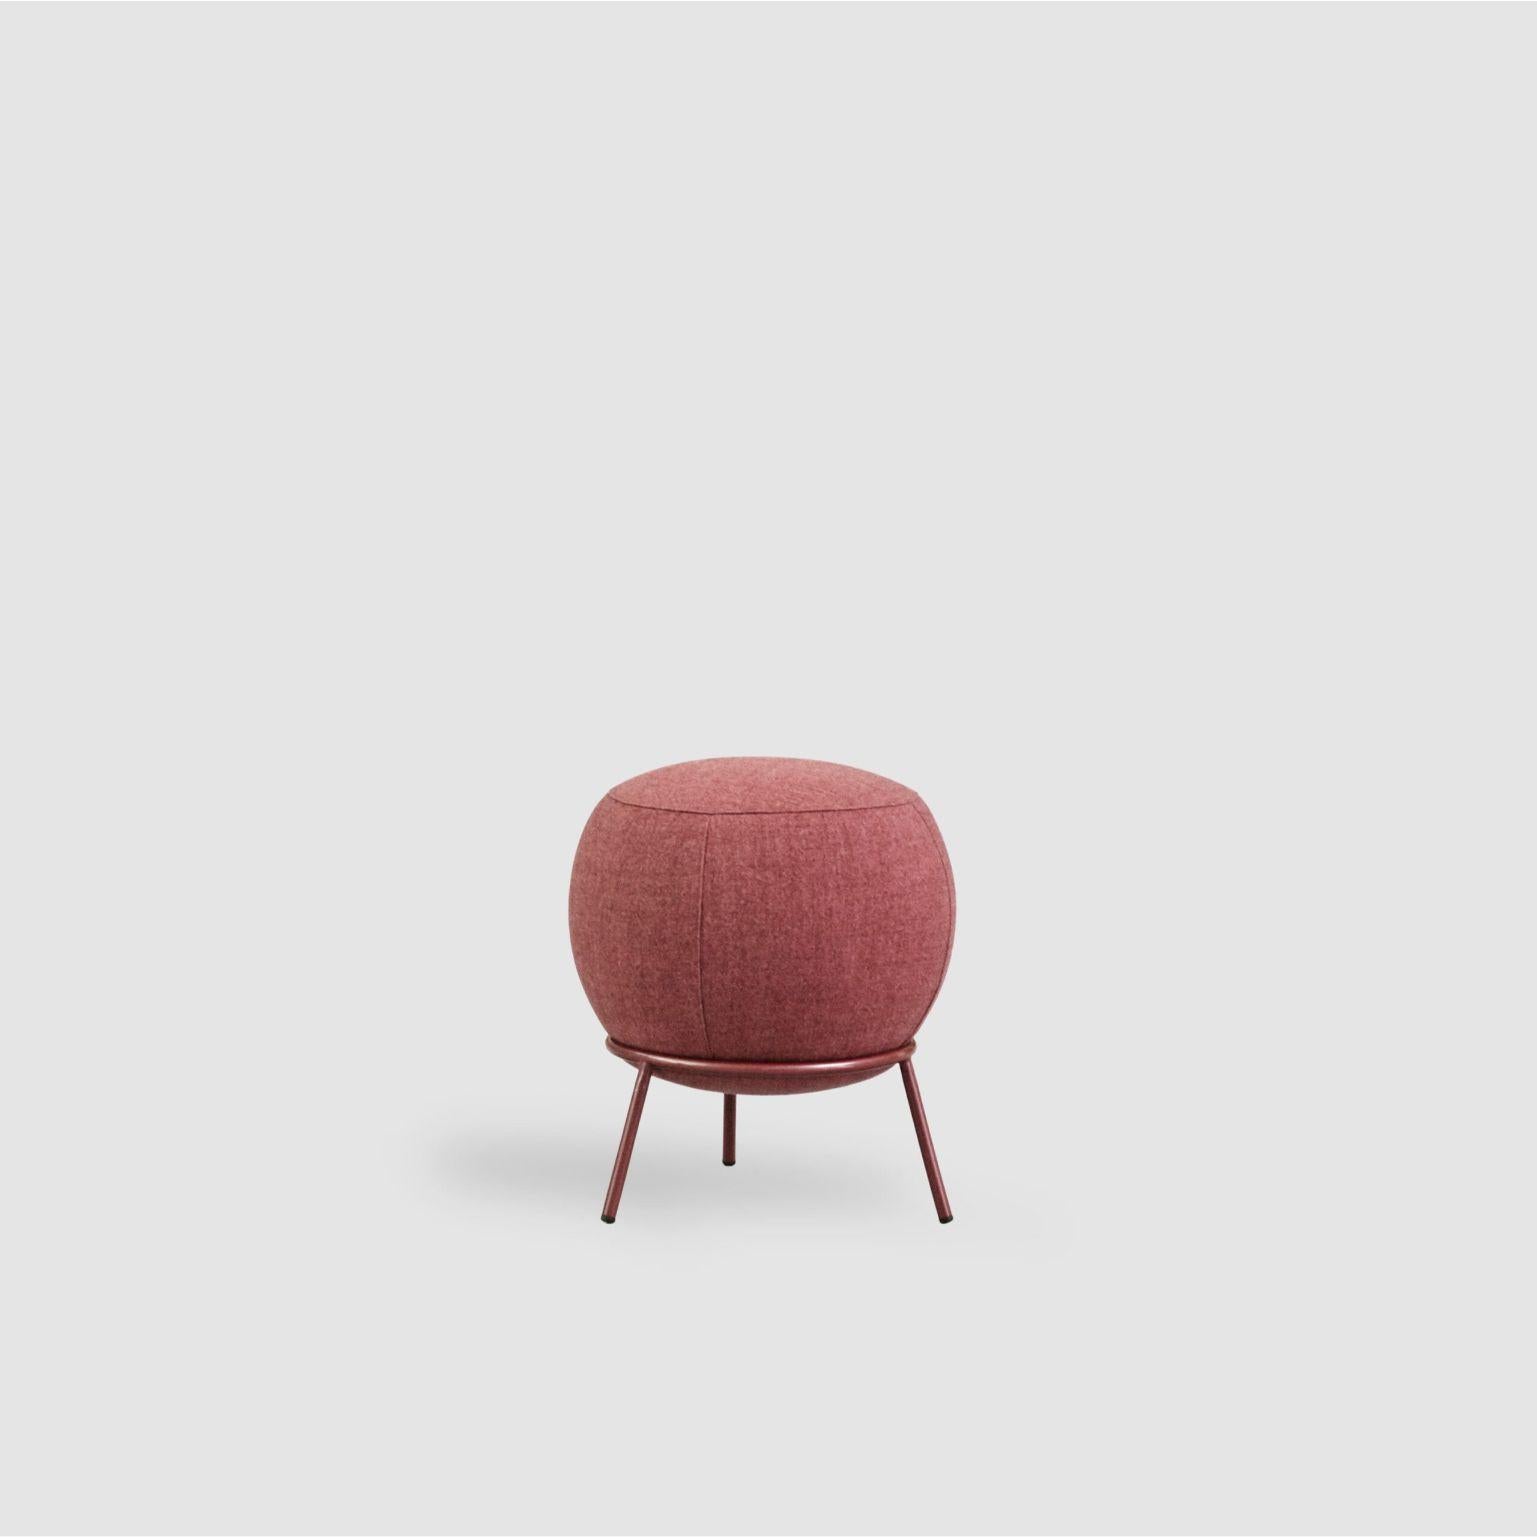 Pair of nest ottomans, red by Pepe Albargues
Dimensions: W42, D42, H43
Materials: Iron structure and MDF board
Foam CMHR (high resilience and flame retardant) for all our cushion filling systems
Painted or chromed legs

Also available: